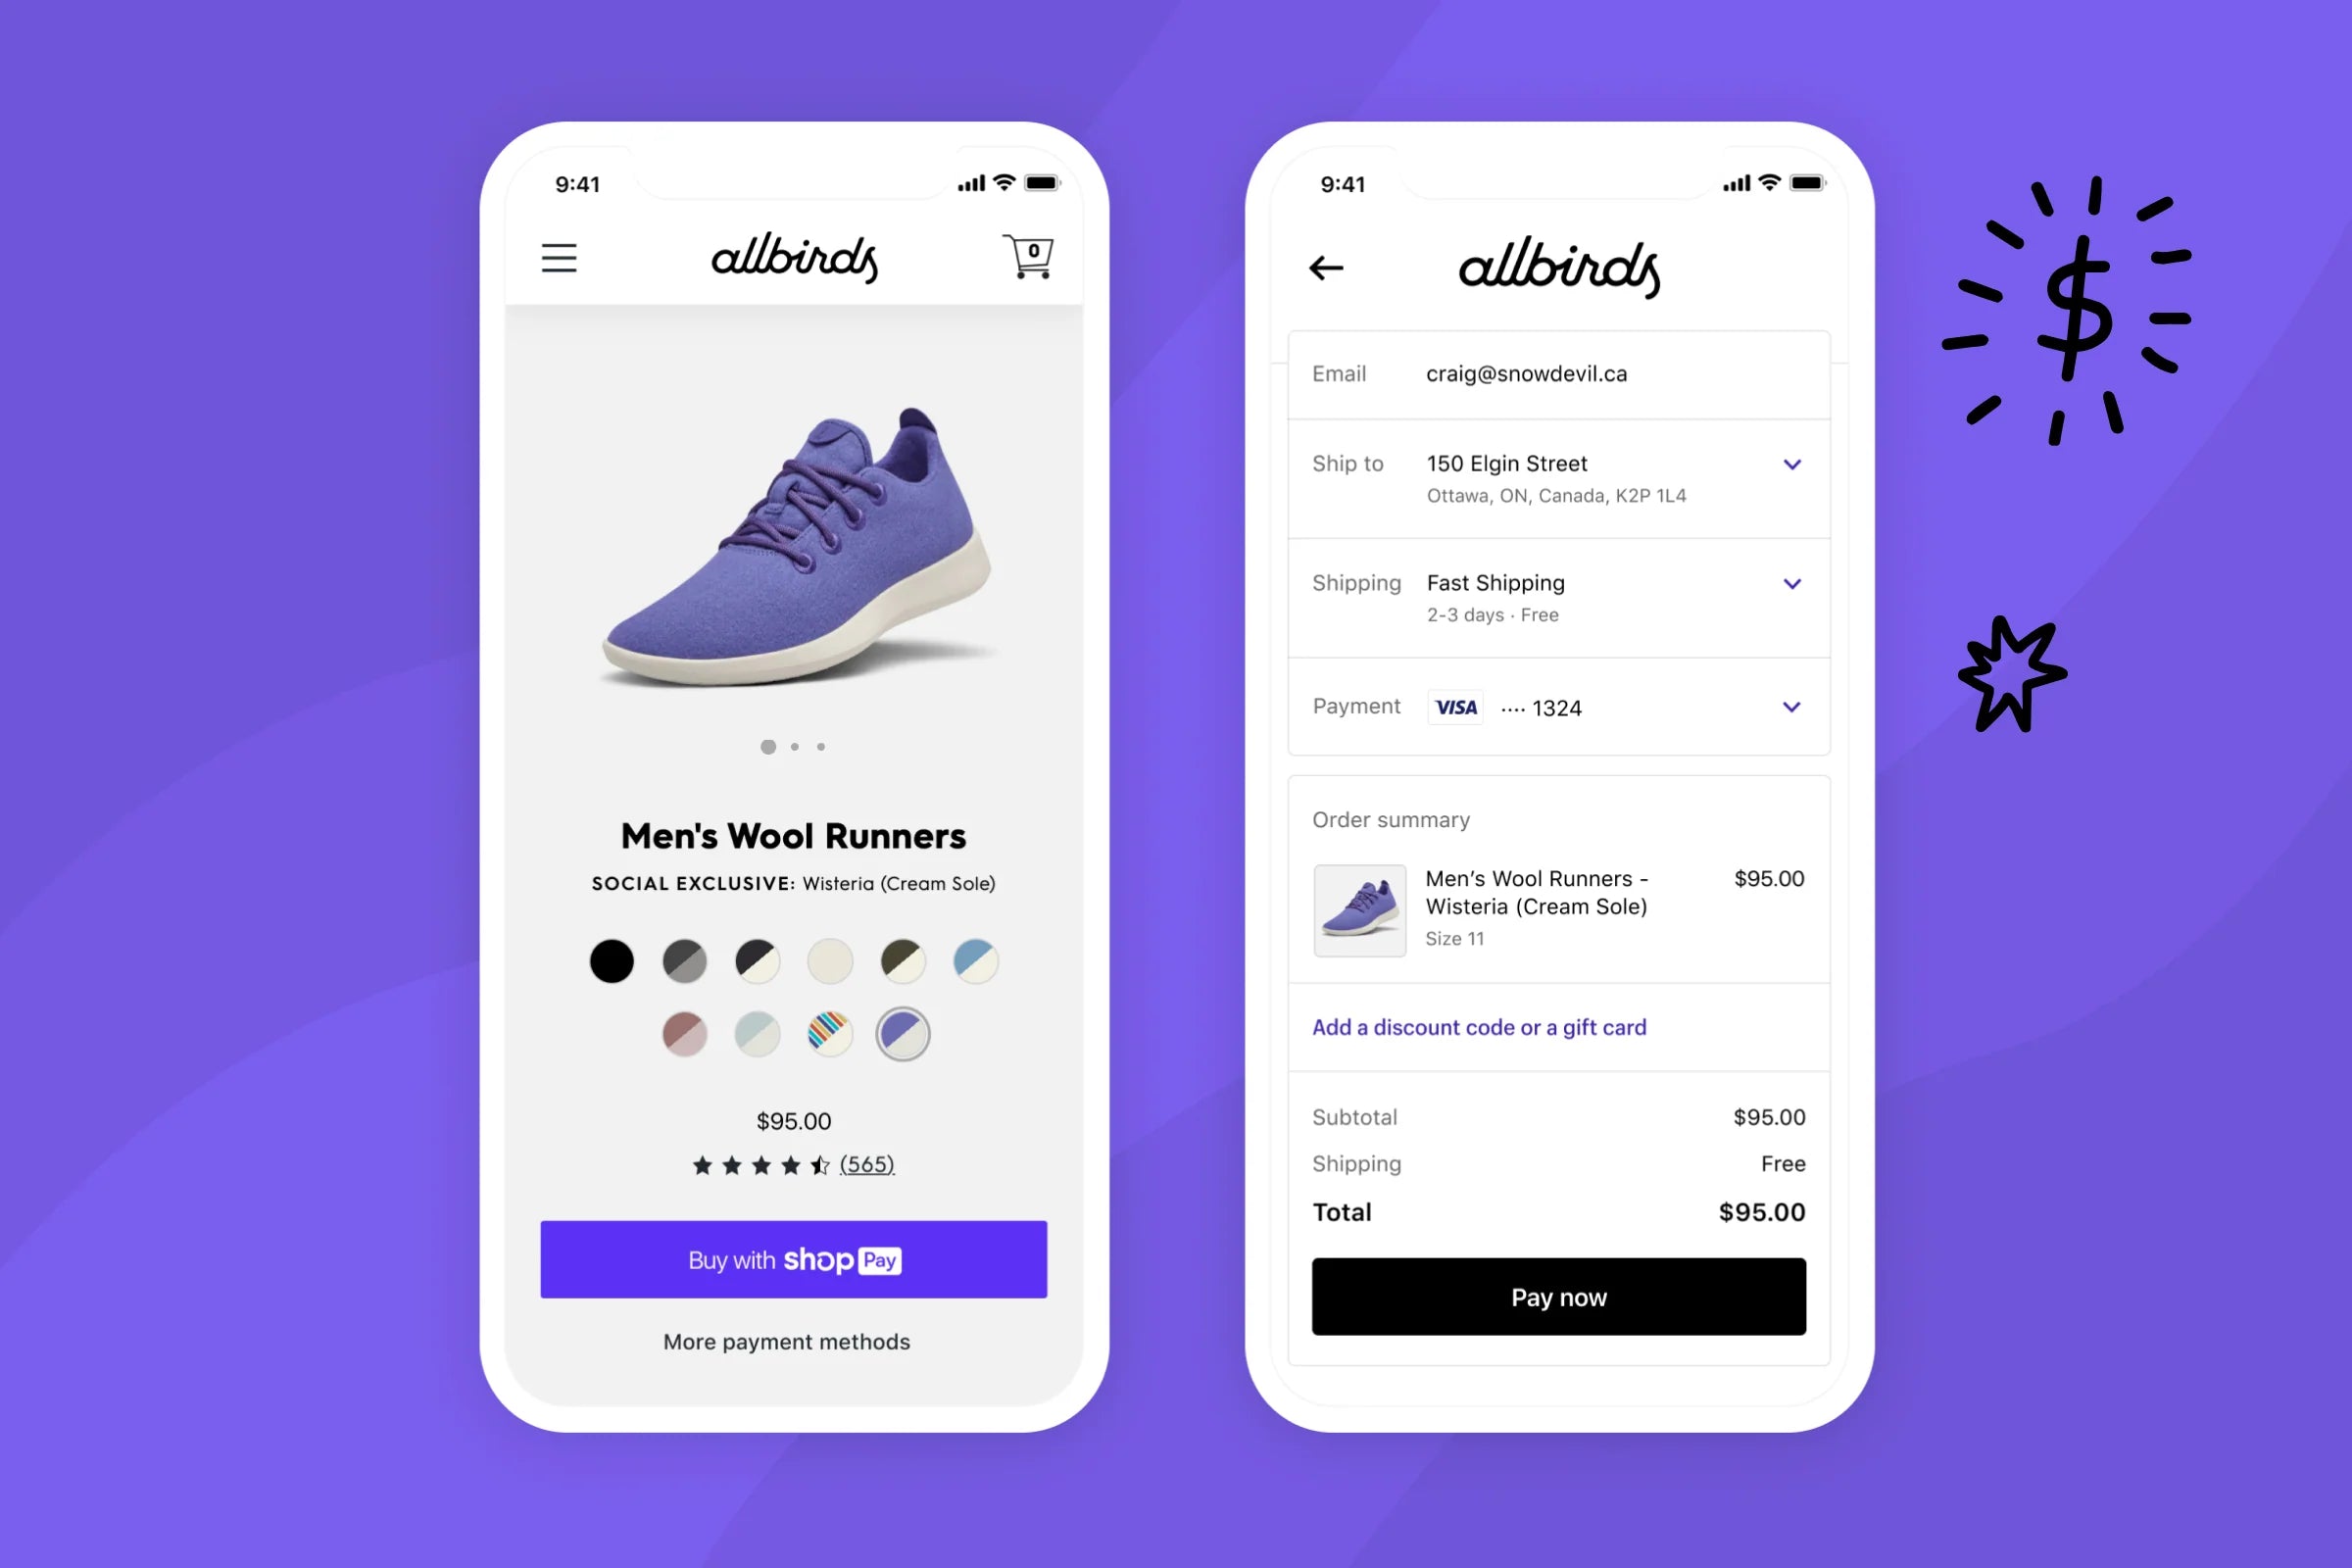 Screenshot of Shopify's Shop App interface showing various retail features